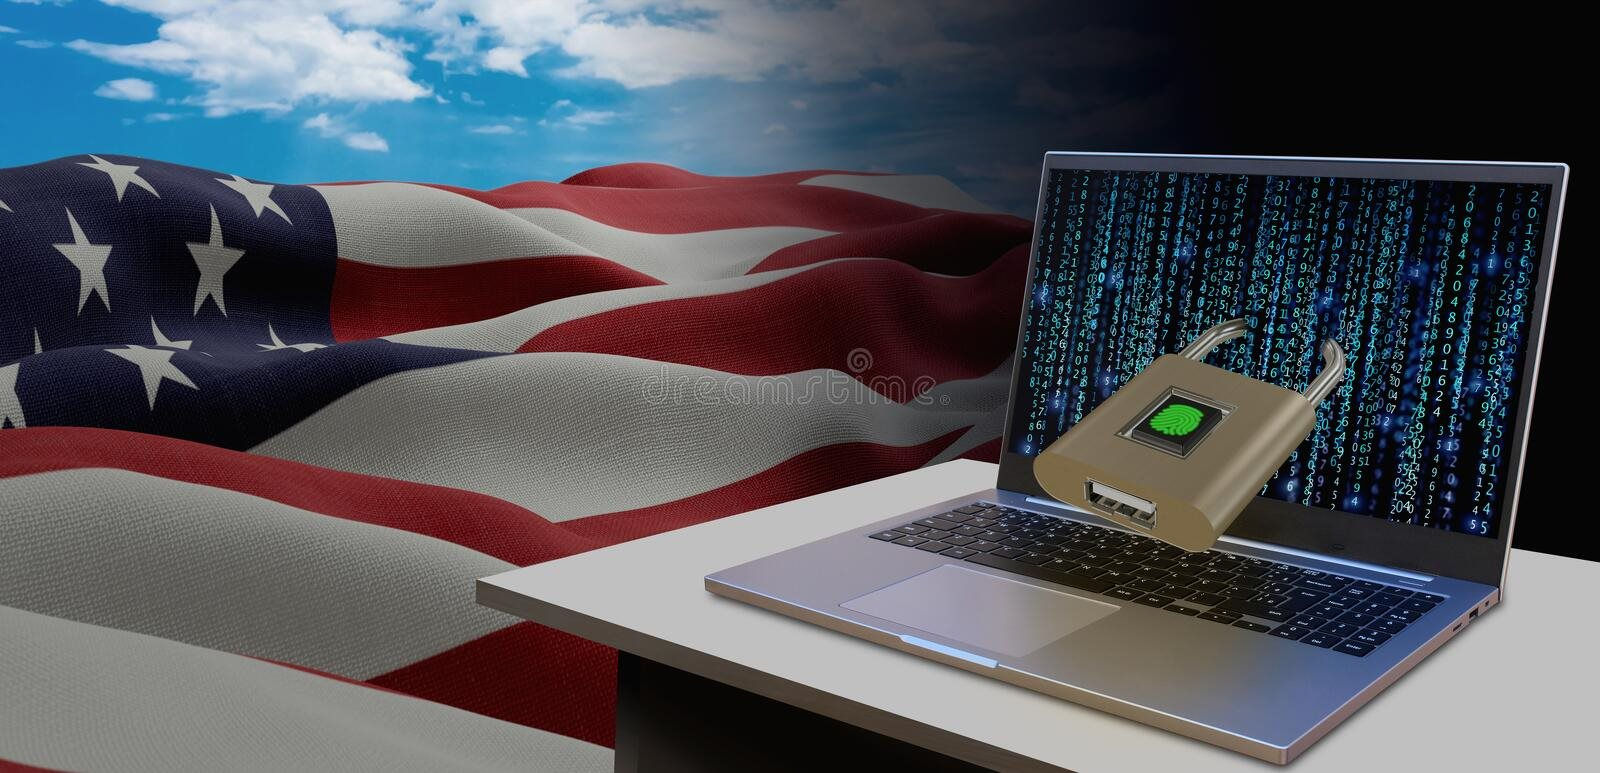 waving-national-flag-american-concept-information-technology-data-security-safety-to-prevent-cyber-attack-internet-232268831.jpg